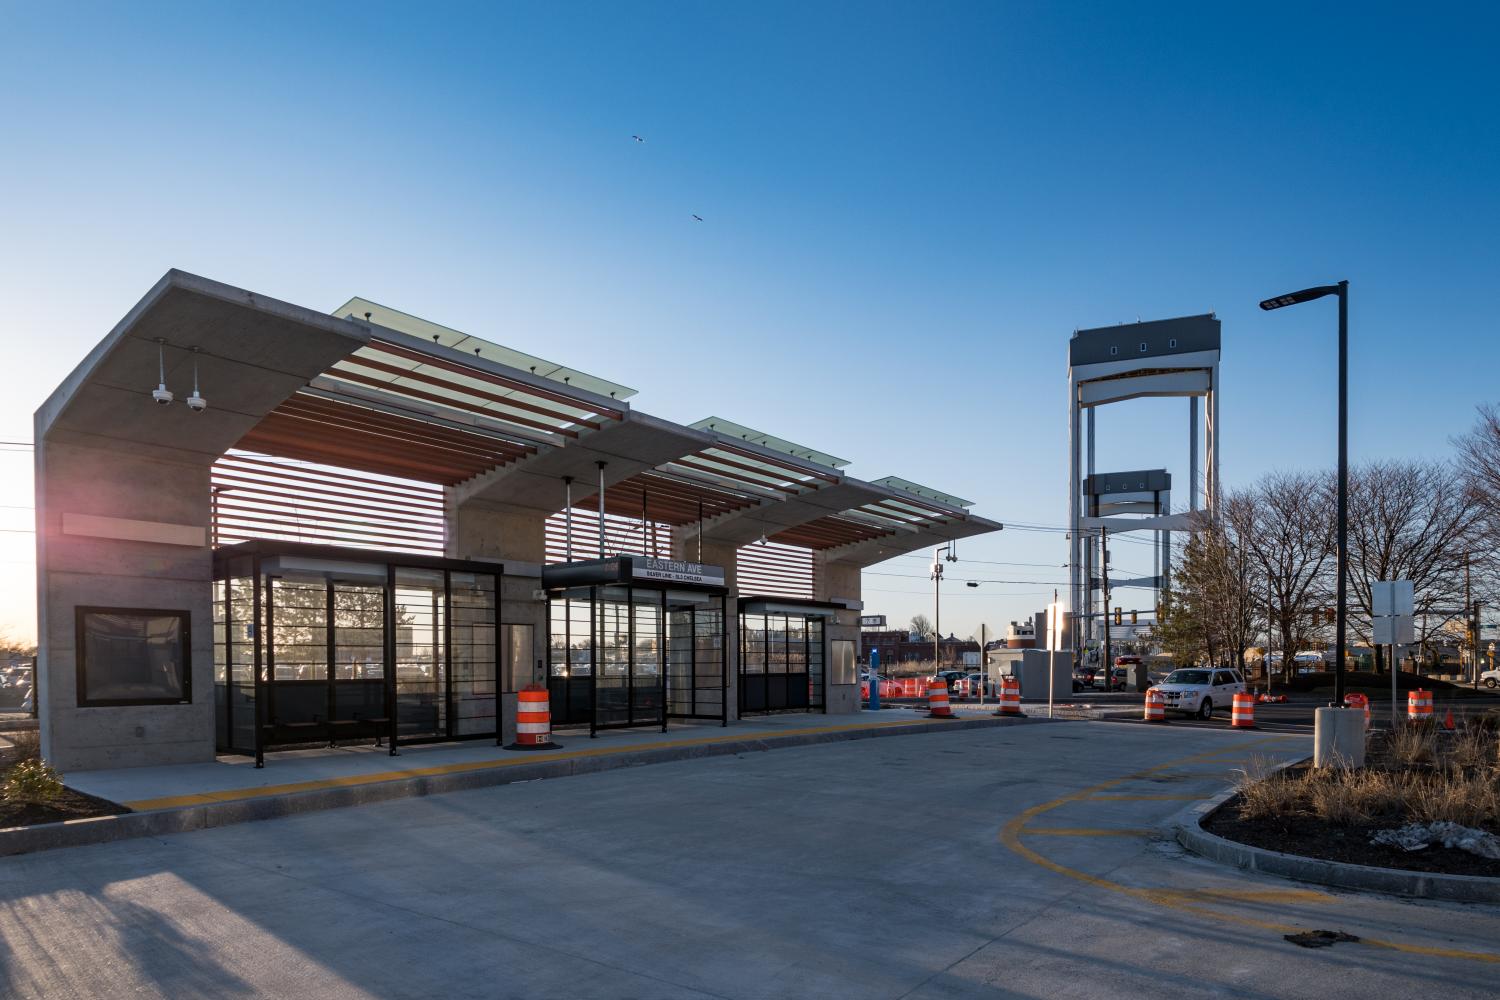 New SL3 station at Eastern Ave in Chelsea, MA